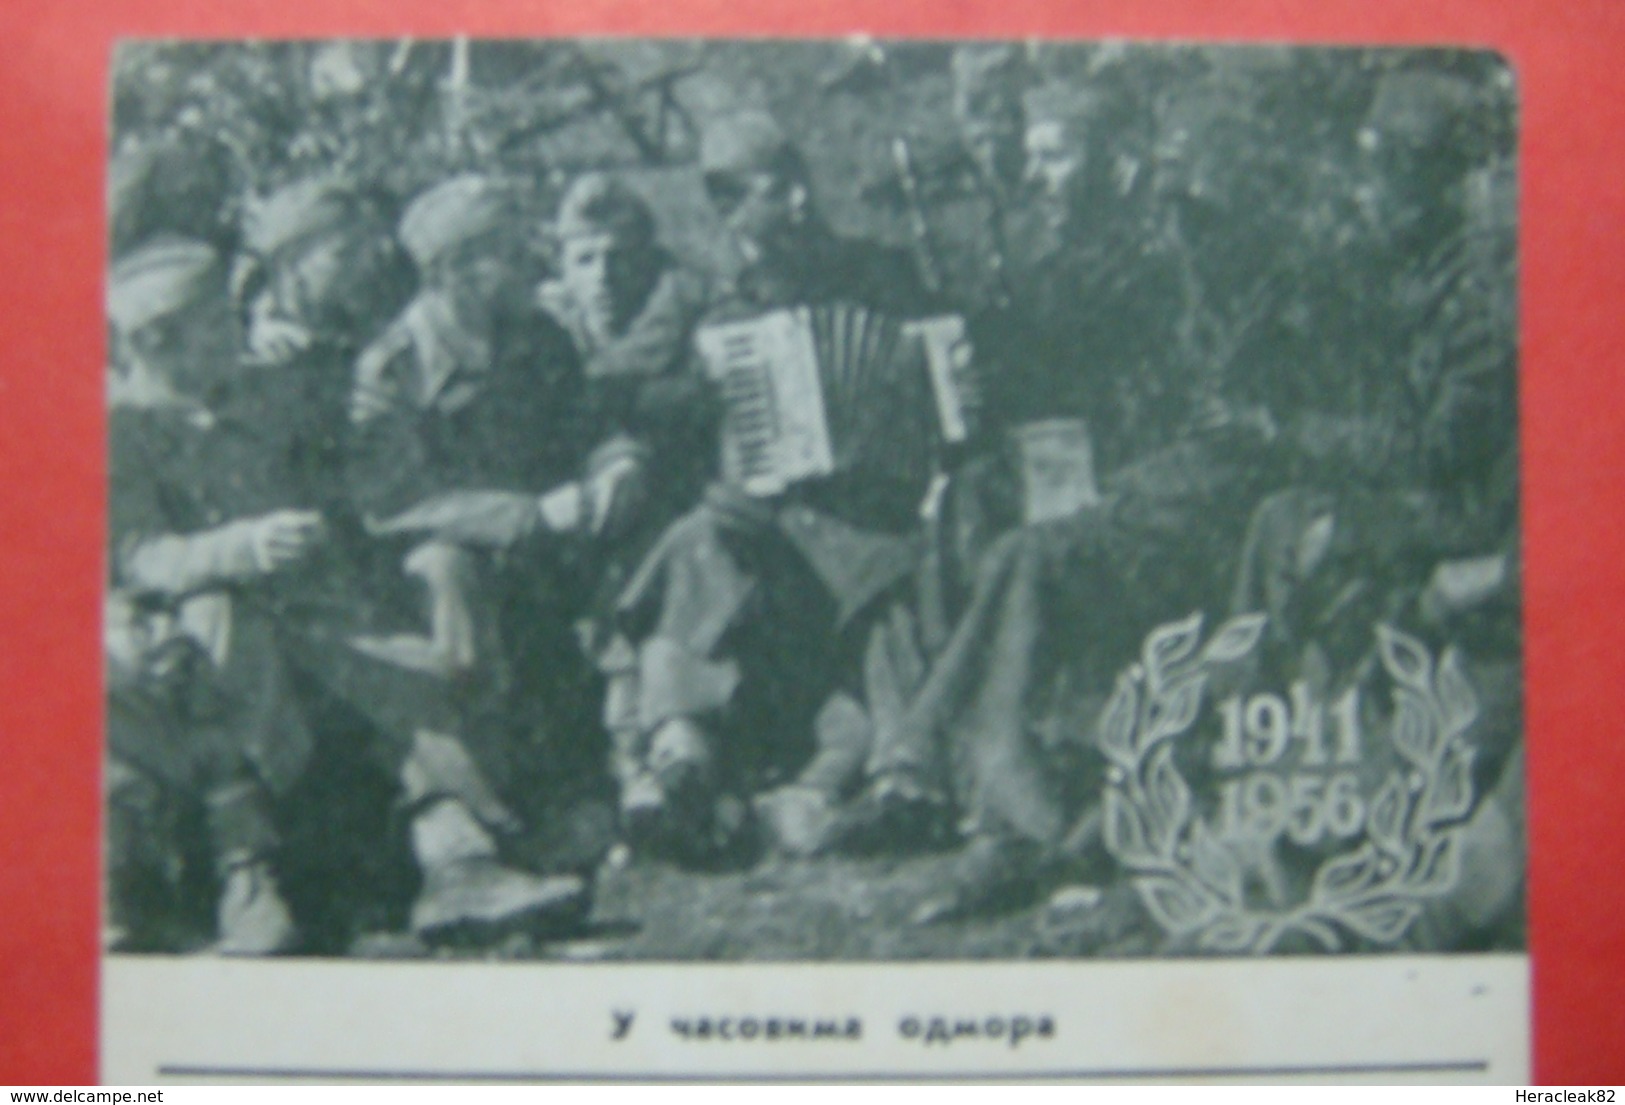 1946 Yugoslavia POSTAL STATIONERY CARD 10 DINARA, Soldiers In Hours Of Rest UNUSED, RARE - Covers & Documents